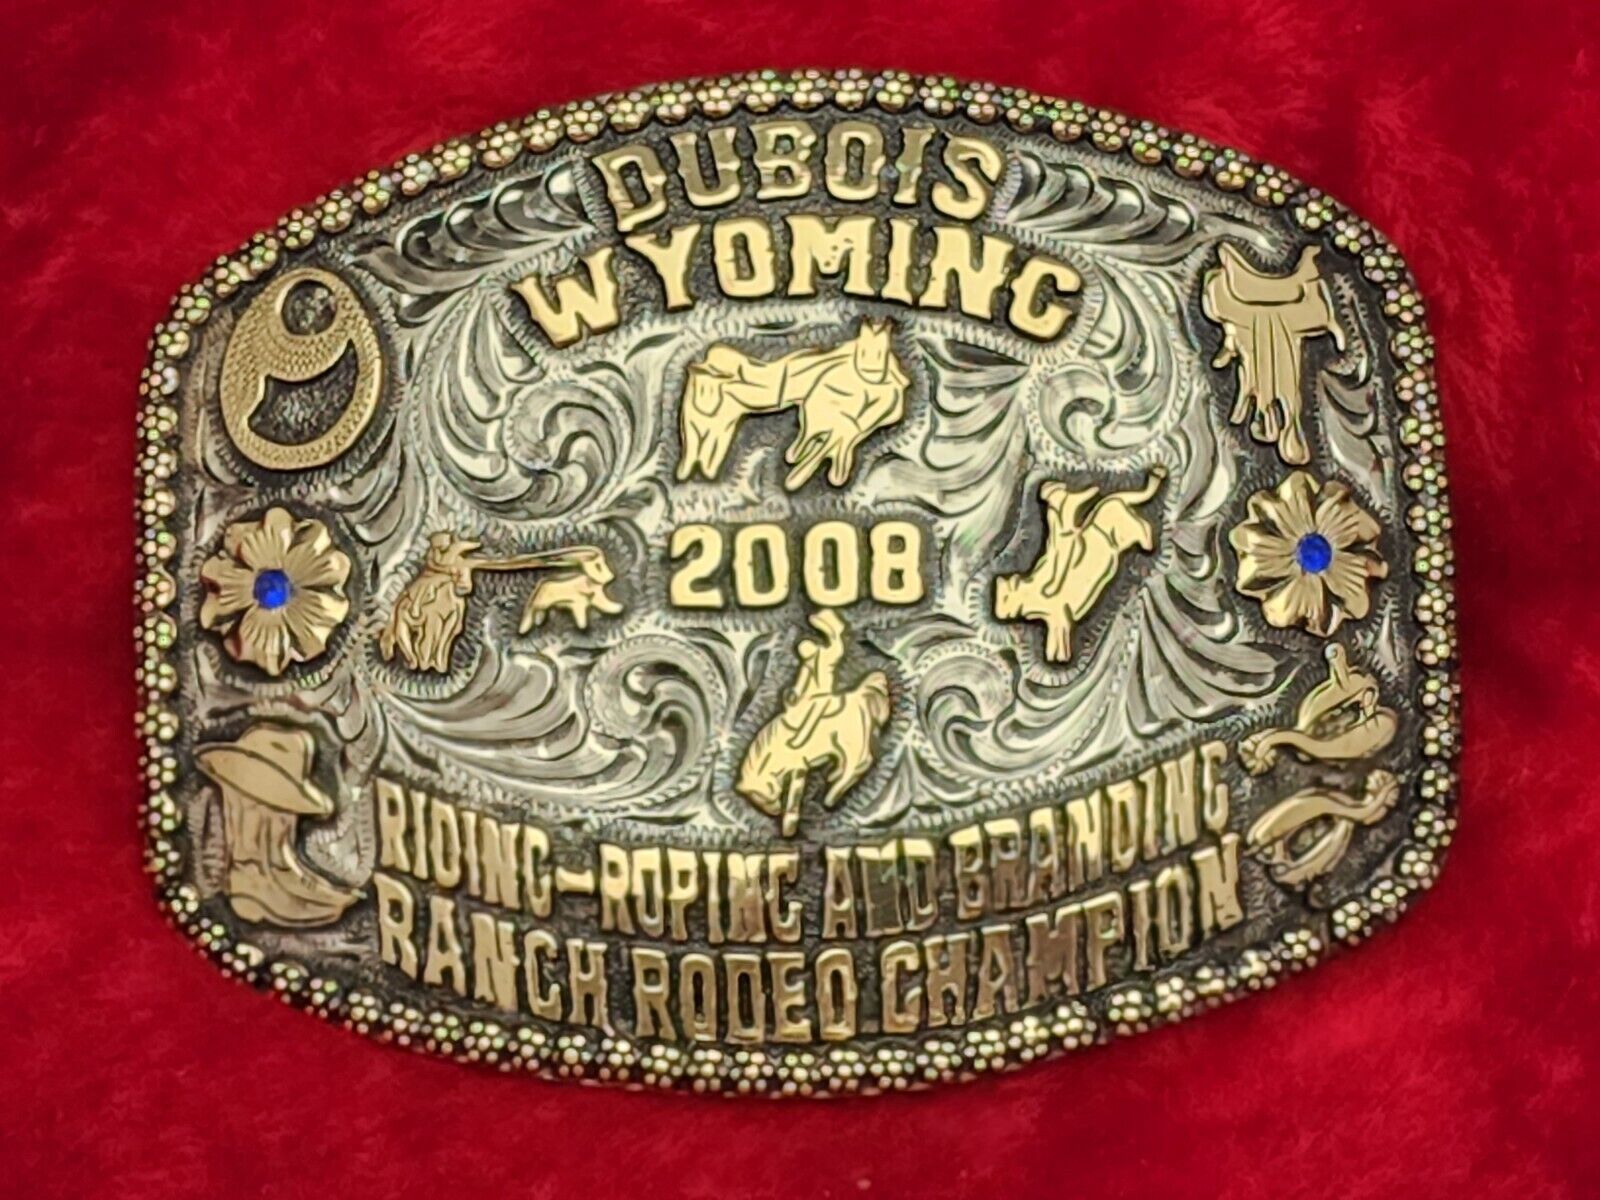 RANCH RODEO CHAMPION TROPHY BUCKLE☆DUBOIS WYOMING☆ALL AROUND☆2008☆RARE☆673